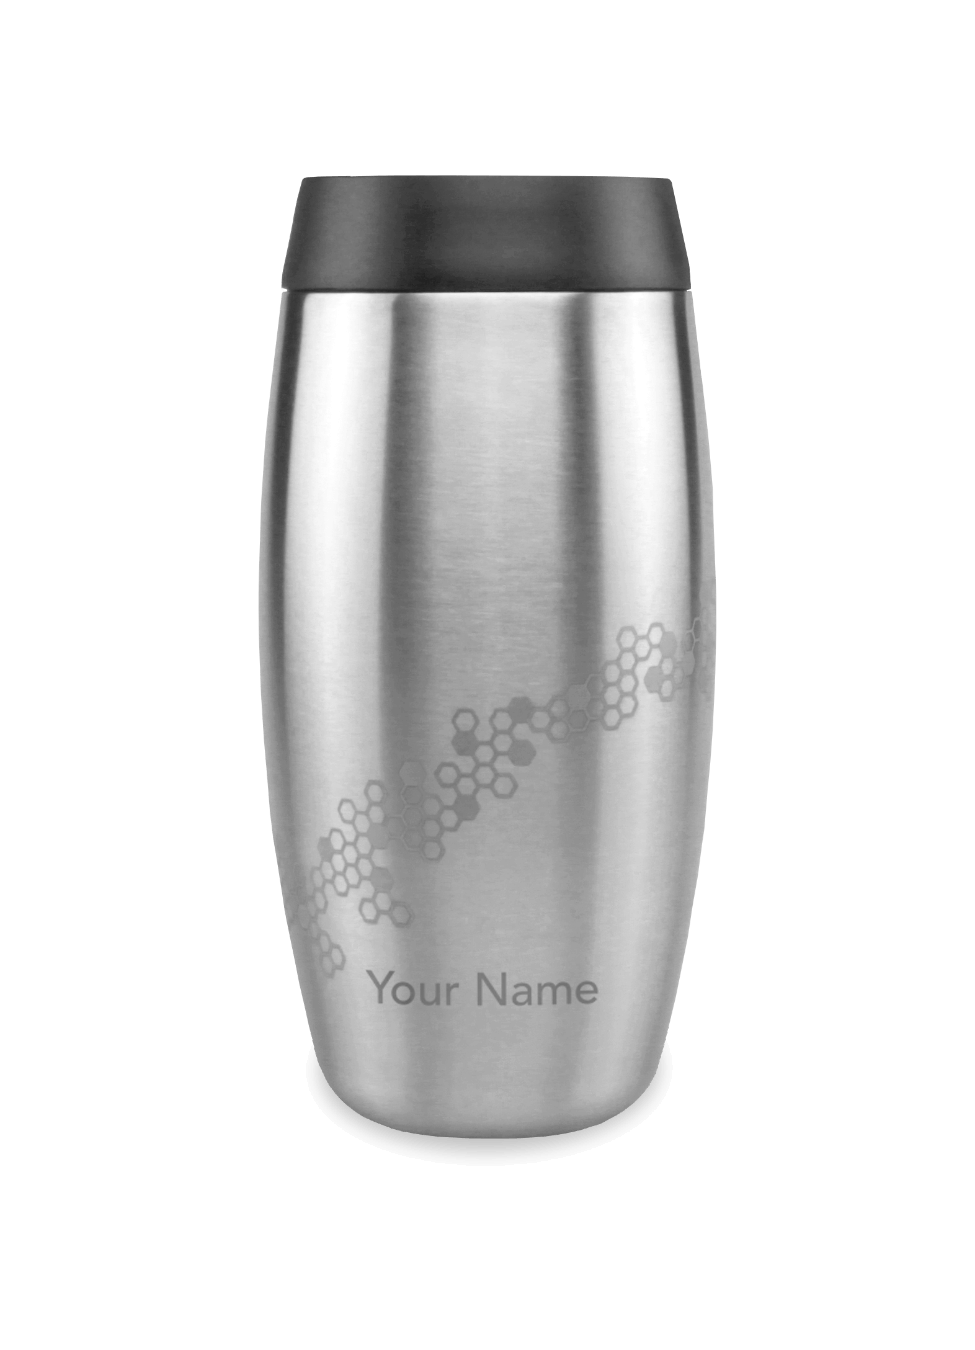 Personalised coffee flask in stainless steel with bee design